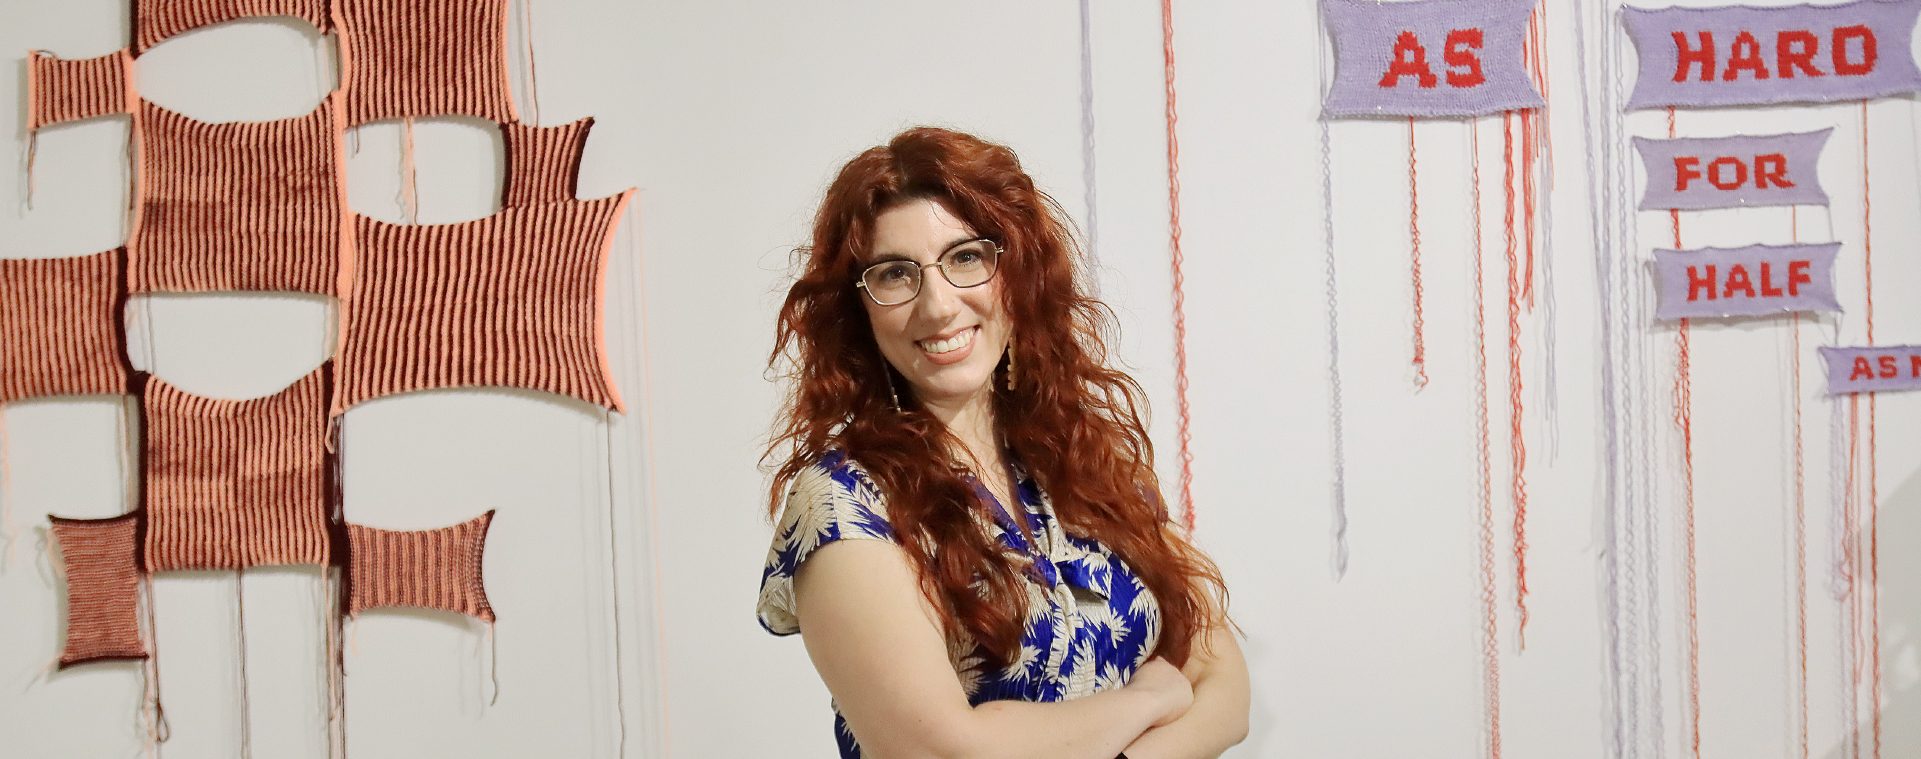 An artist with long red hair, wearing glasses and a blue patterned dress stands with arms crossed in front of a white wall with crocheted artwork that reads ‘Twice as hard for half as … ’ 